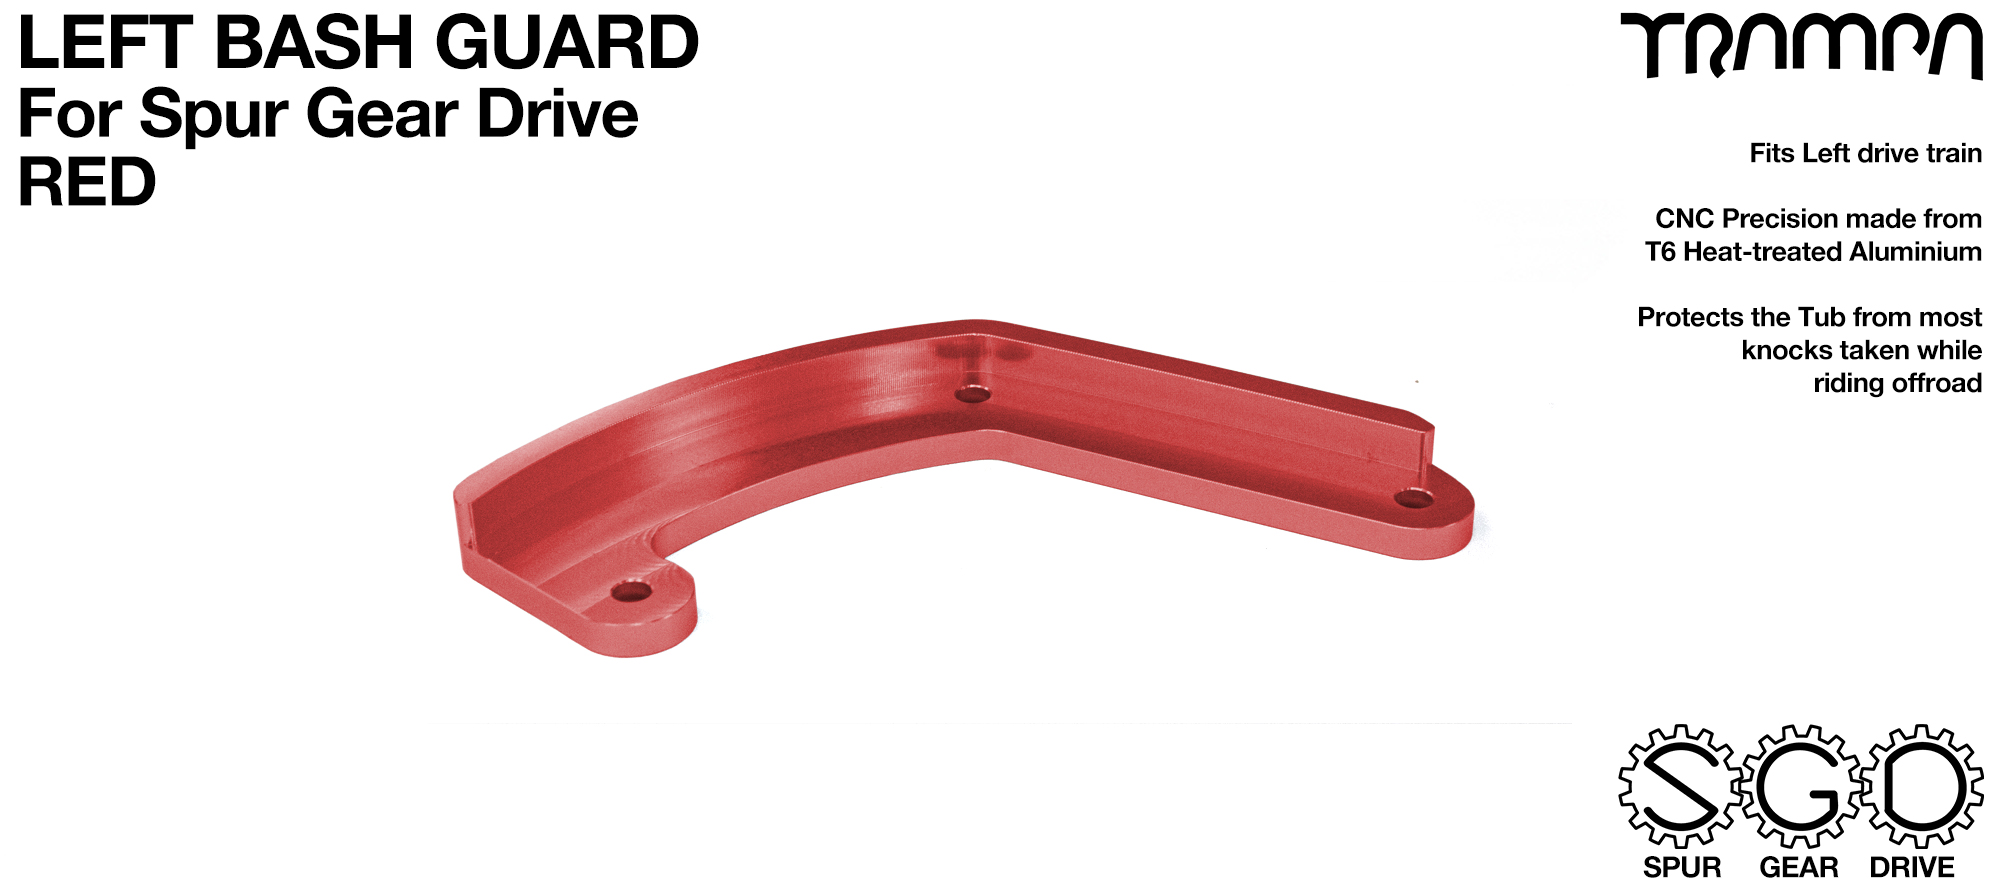 SPUR Gear Drive Bash Guard - LEFT Side - RED